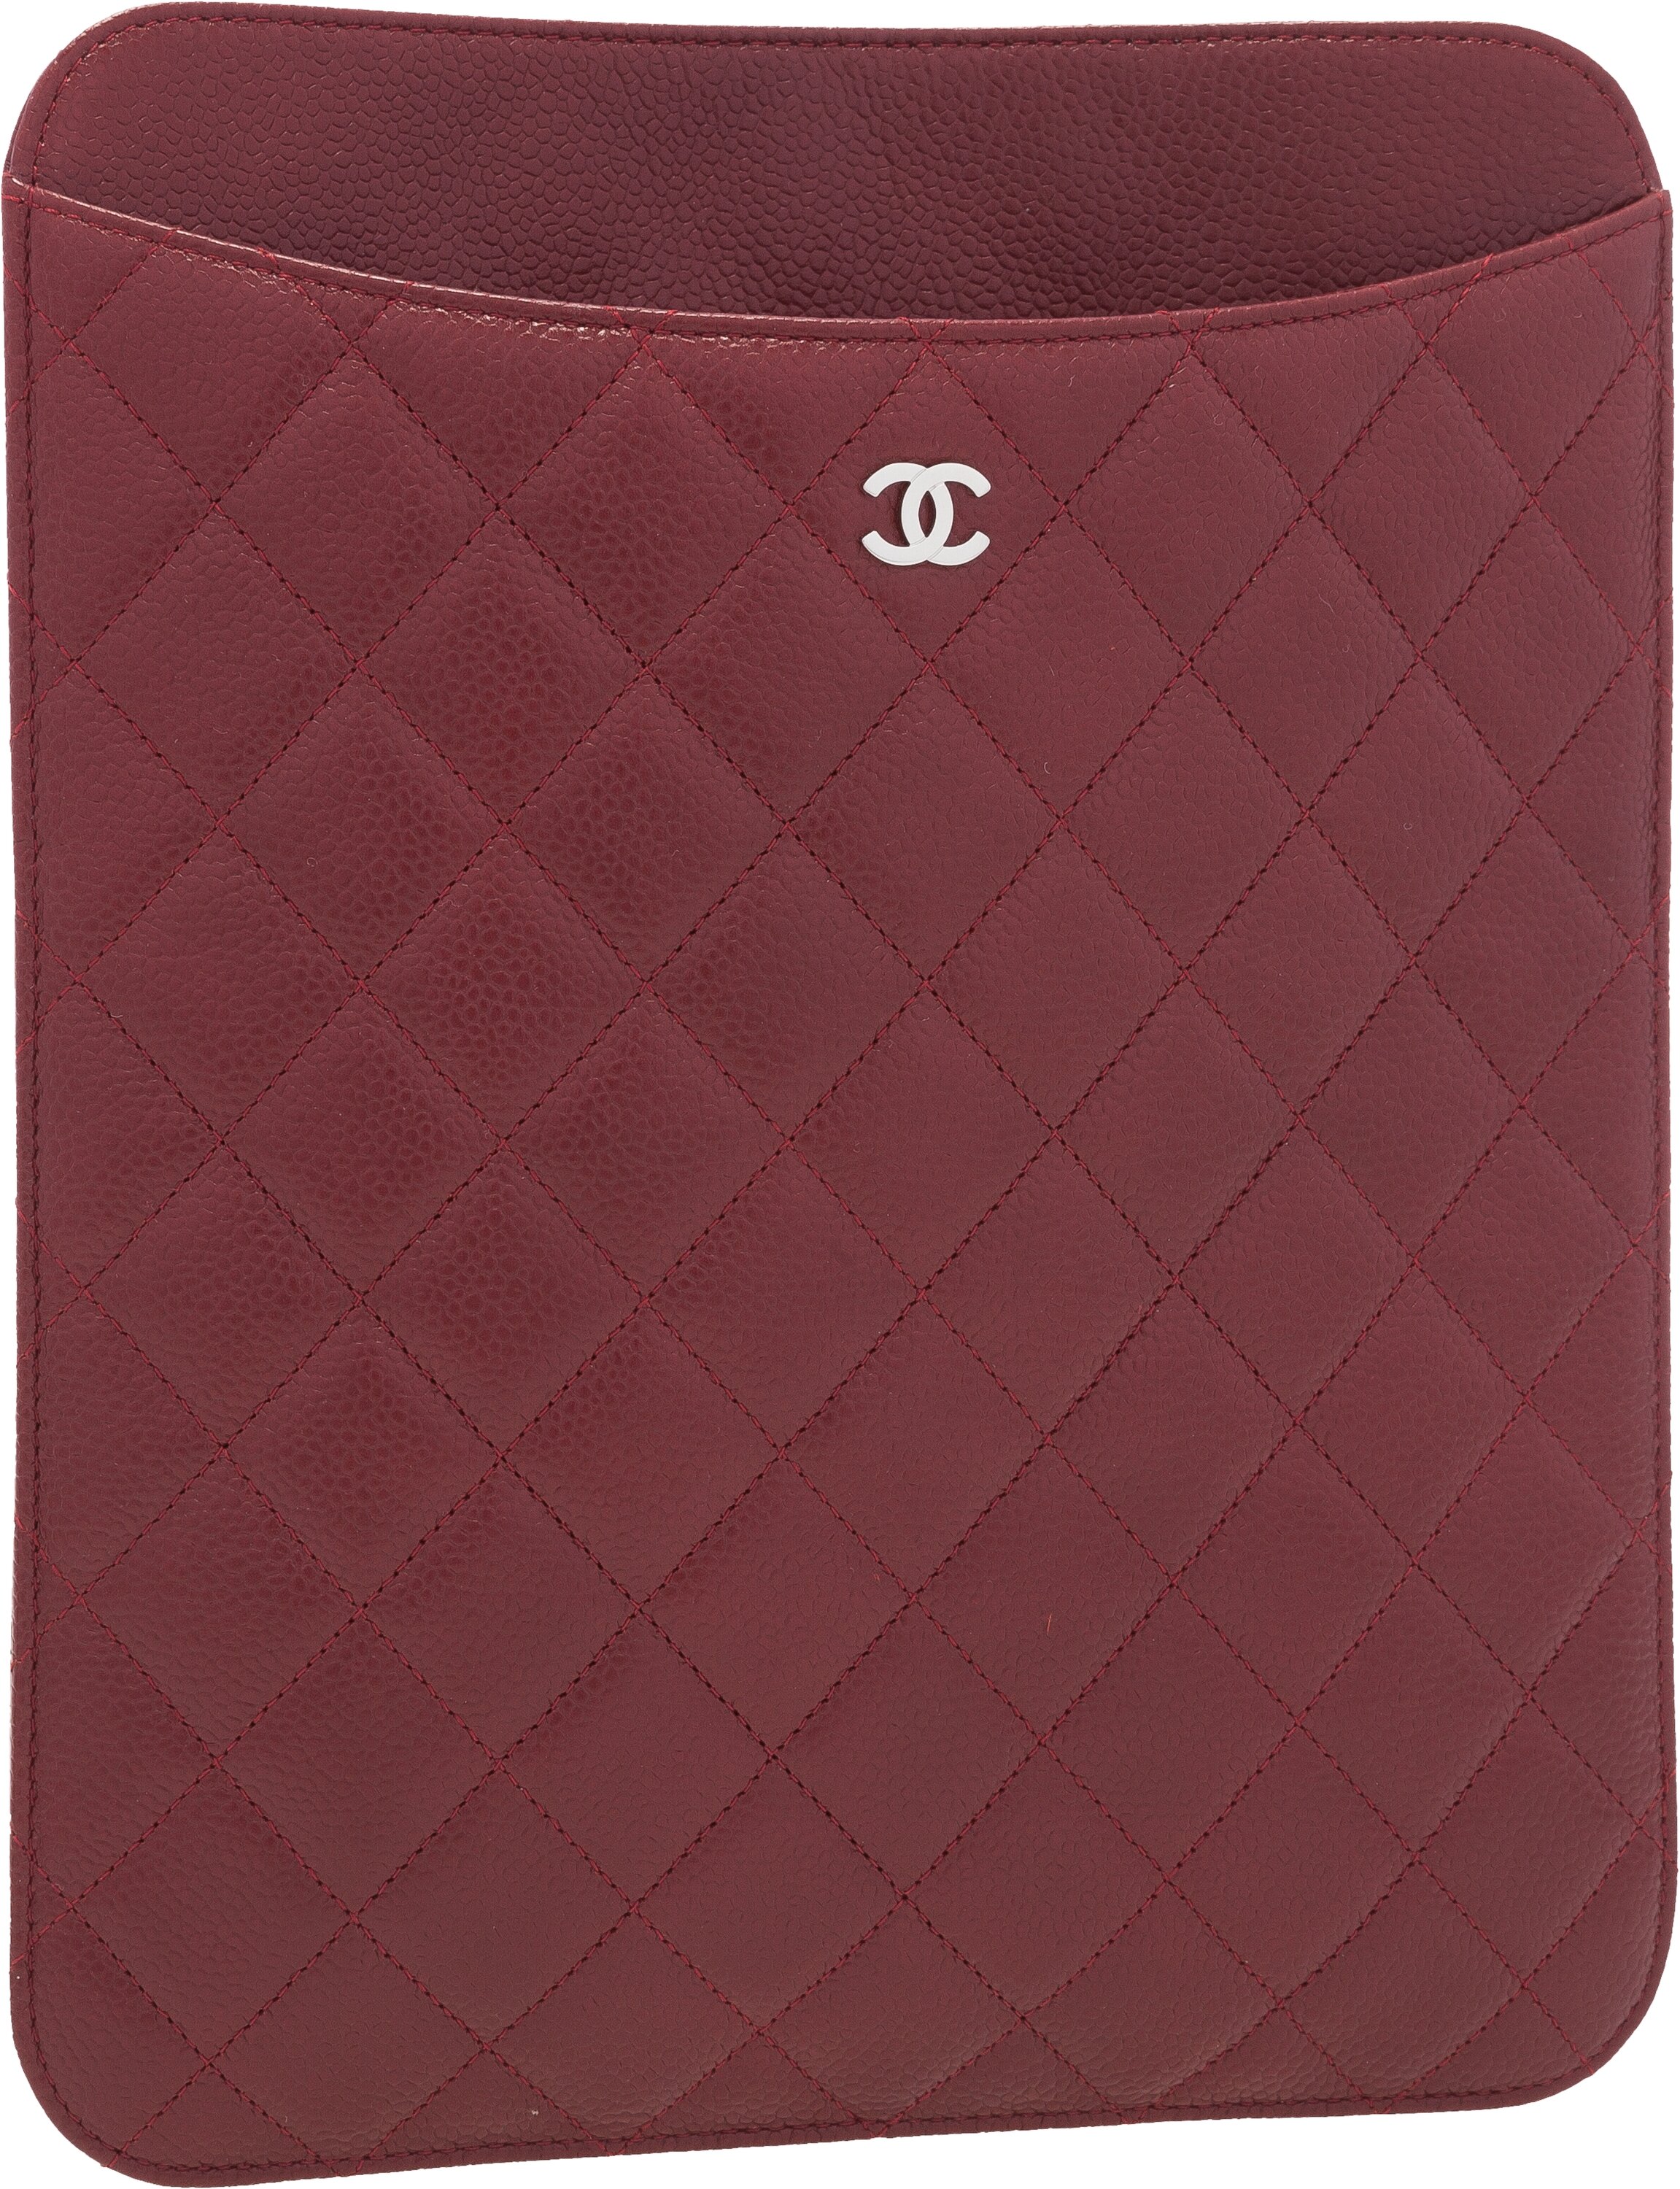 CHANEL, Bags, Chanel Authentic Caviar Leather Ipad Cover